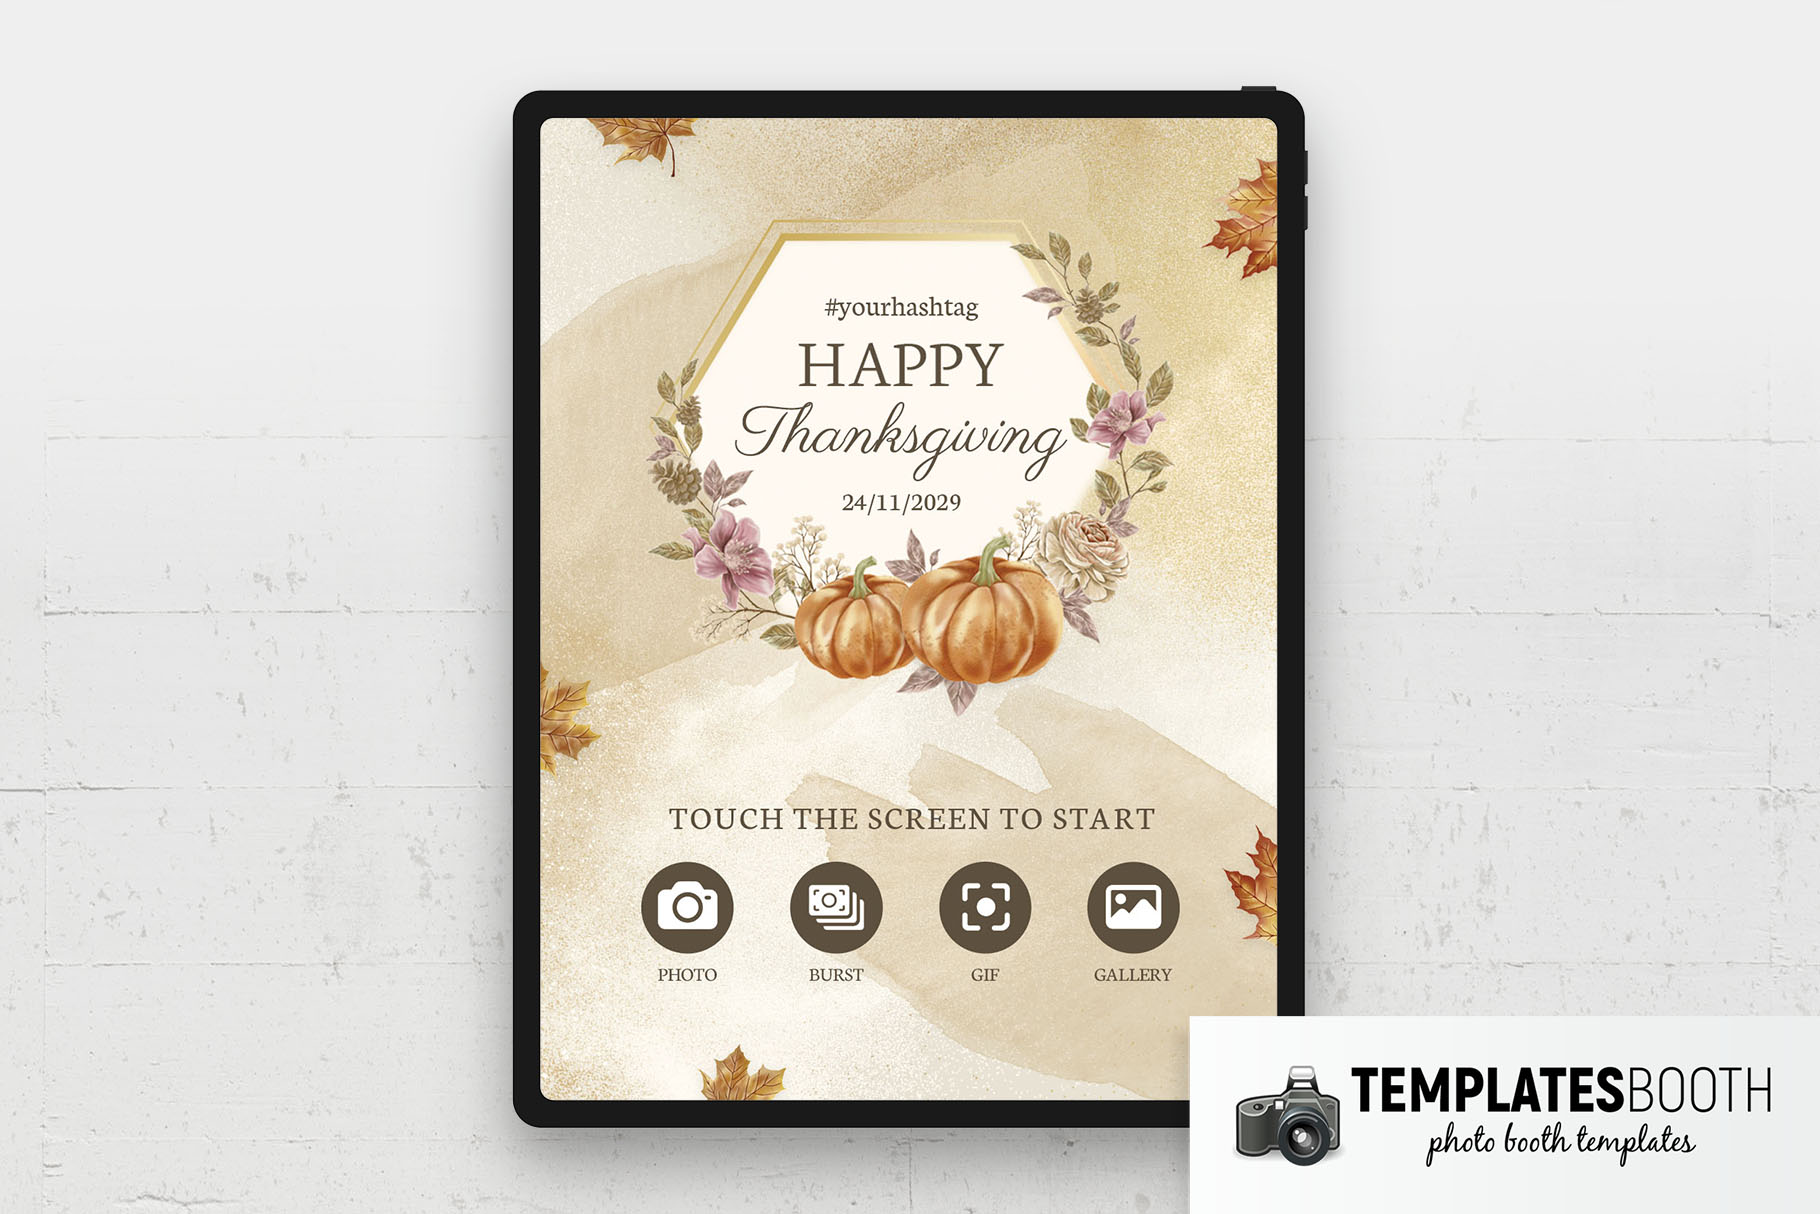 Rustic Thanksgiving Photo Booth Welcome Screen